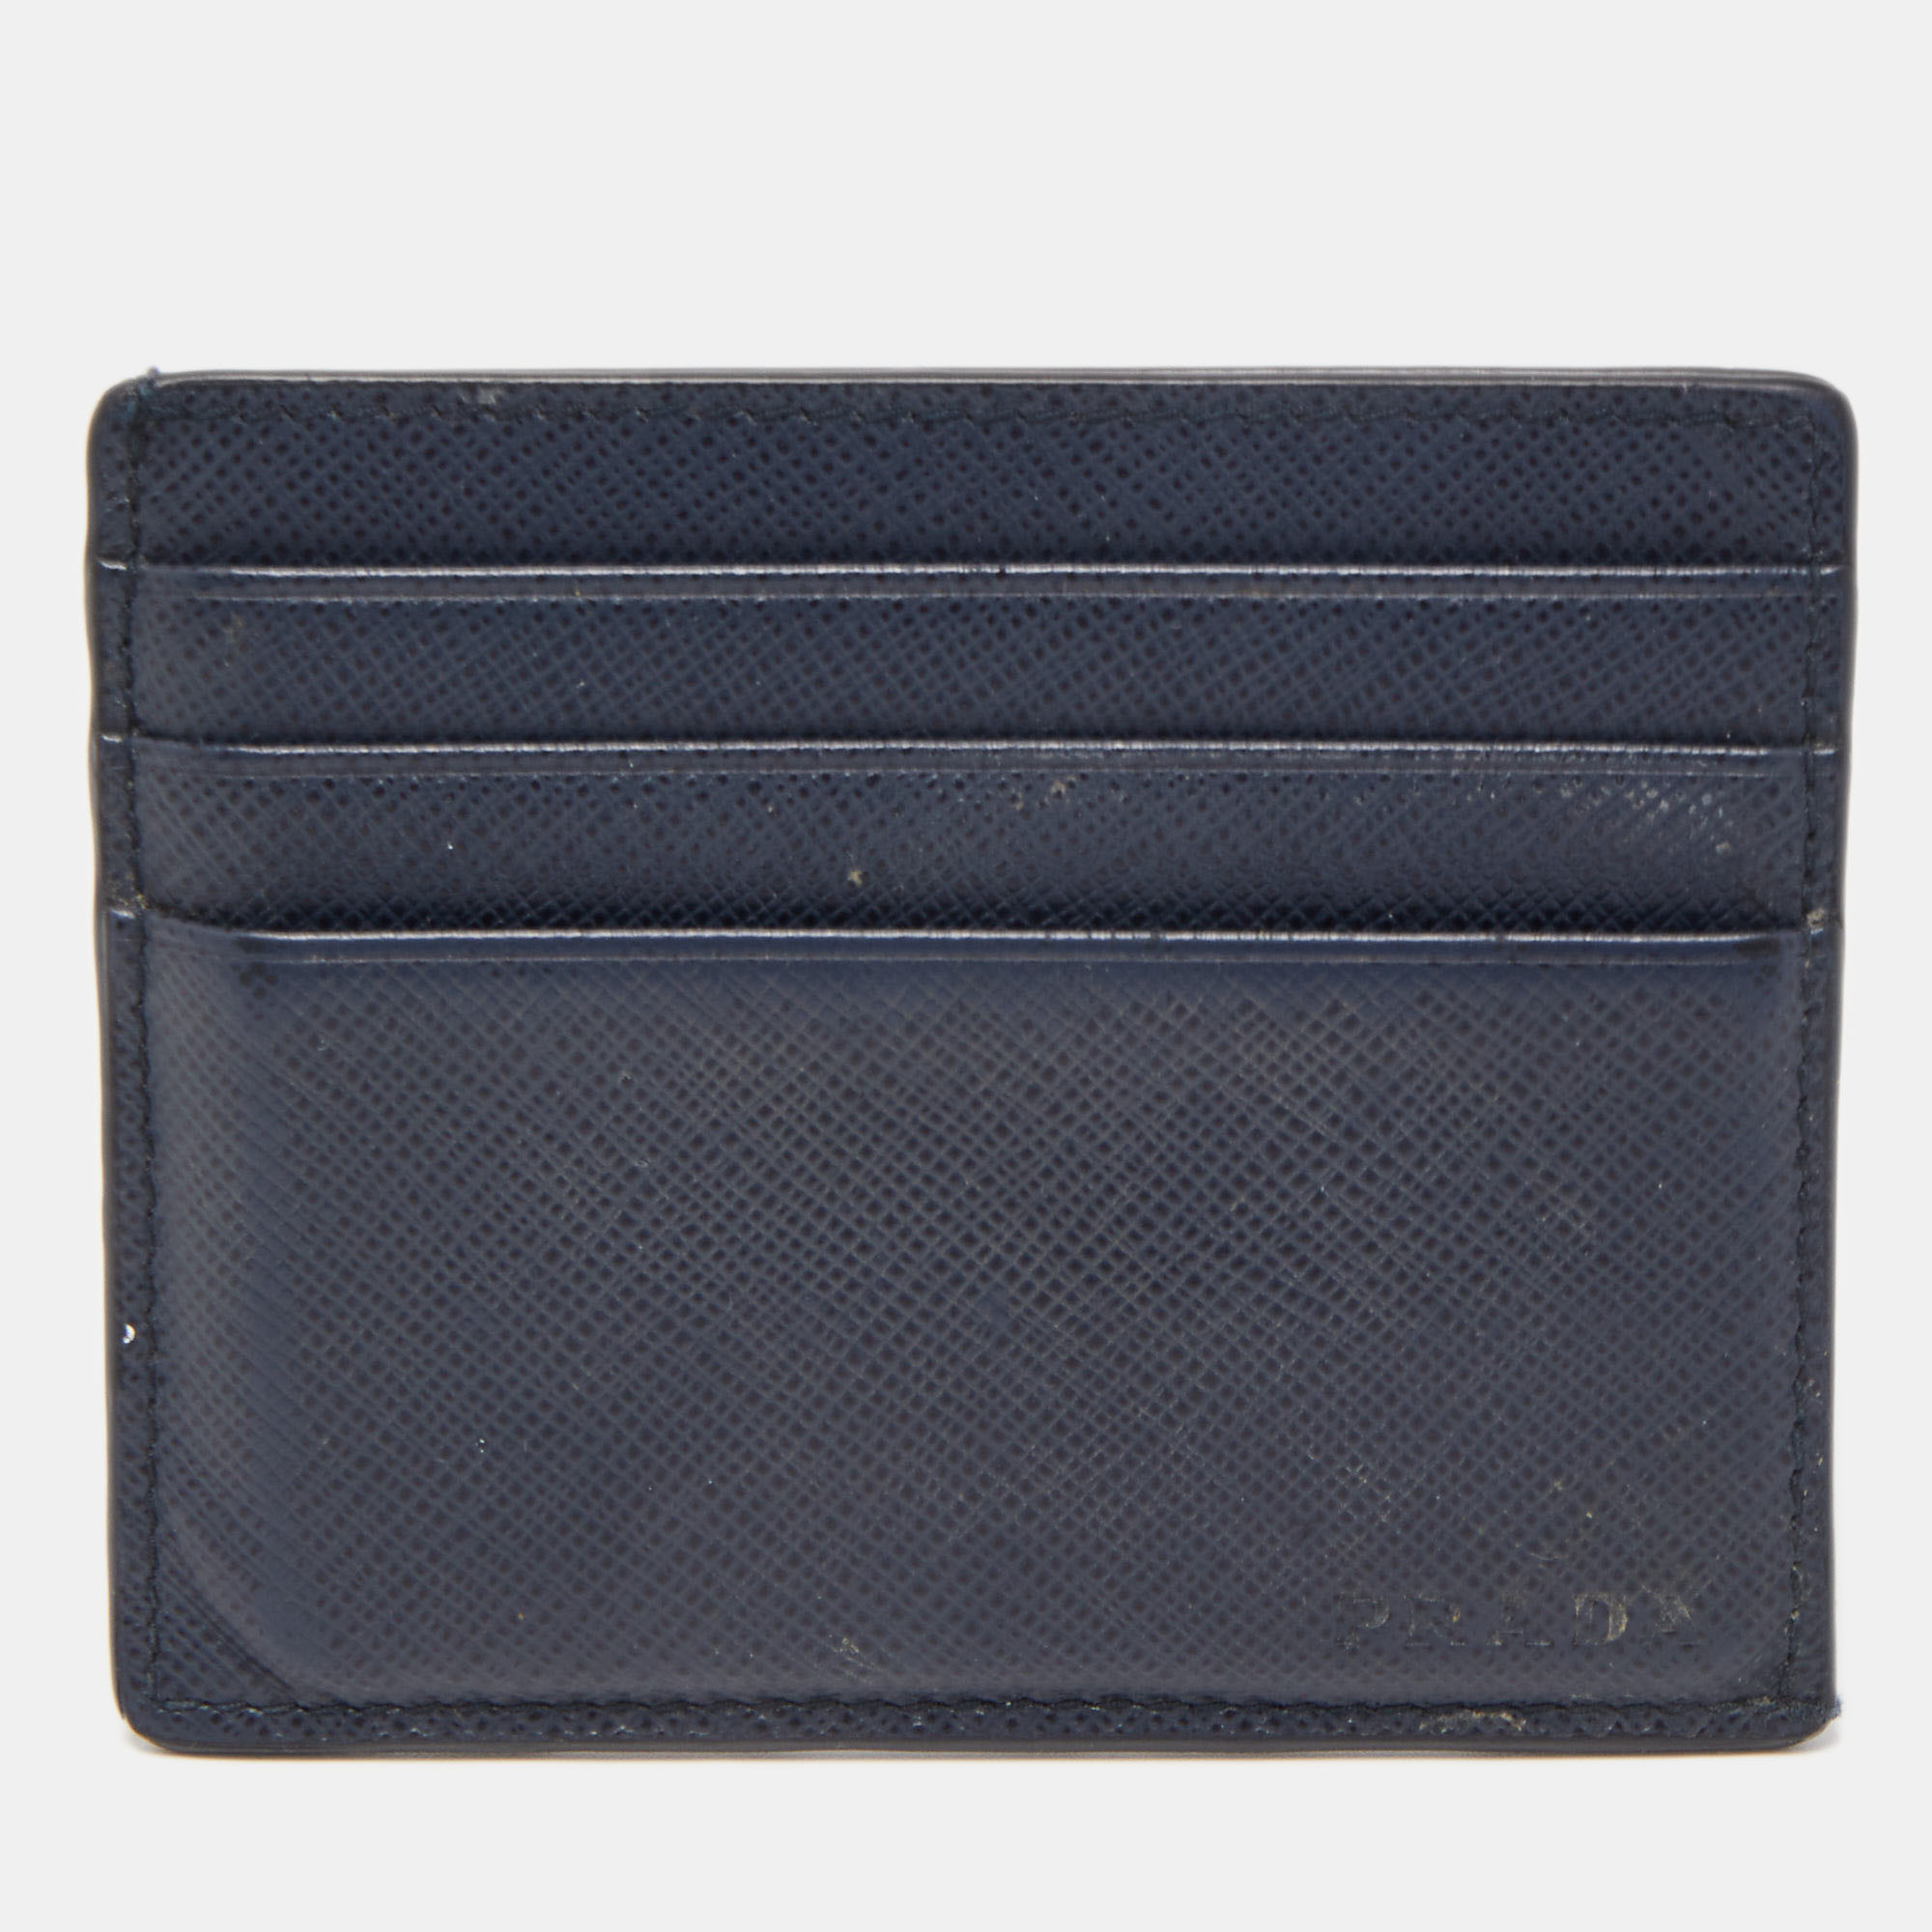 Pre-owned Prada Navy Blue Saffiano Metal Leather Card Holder